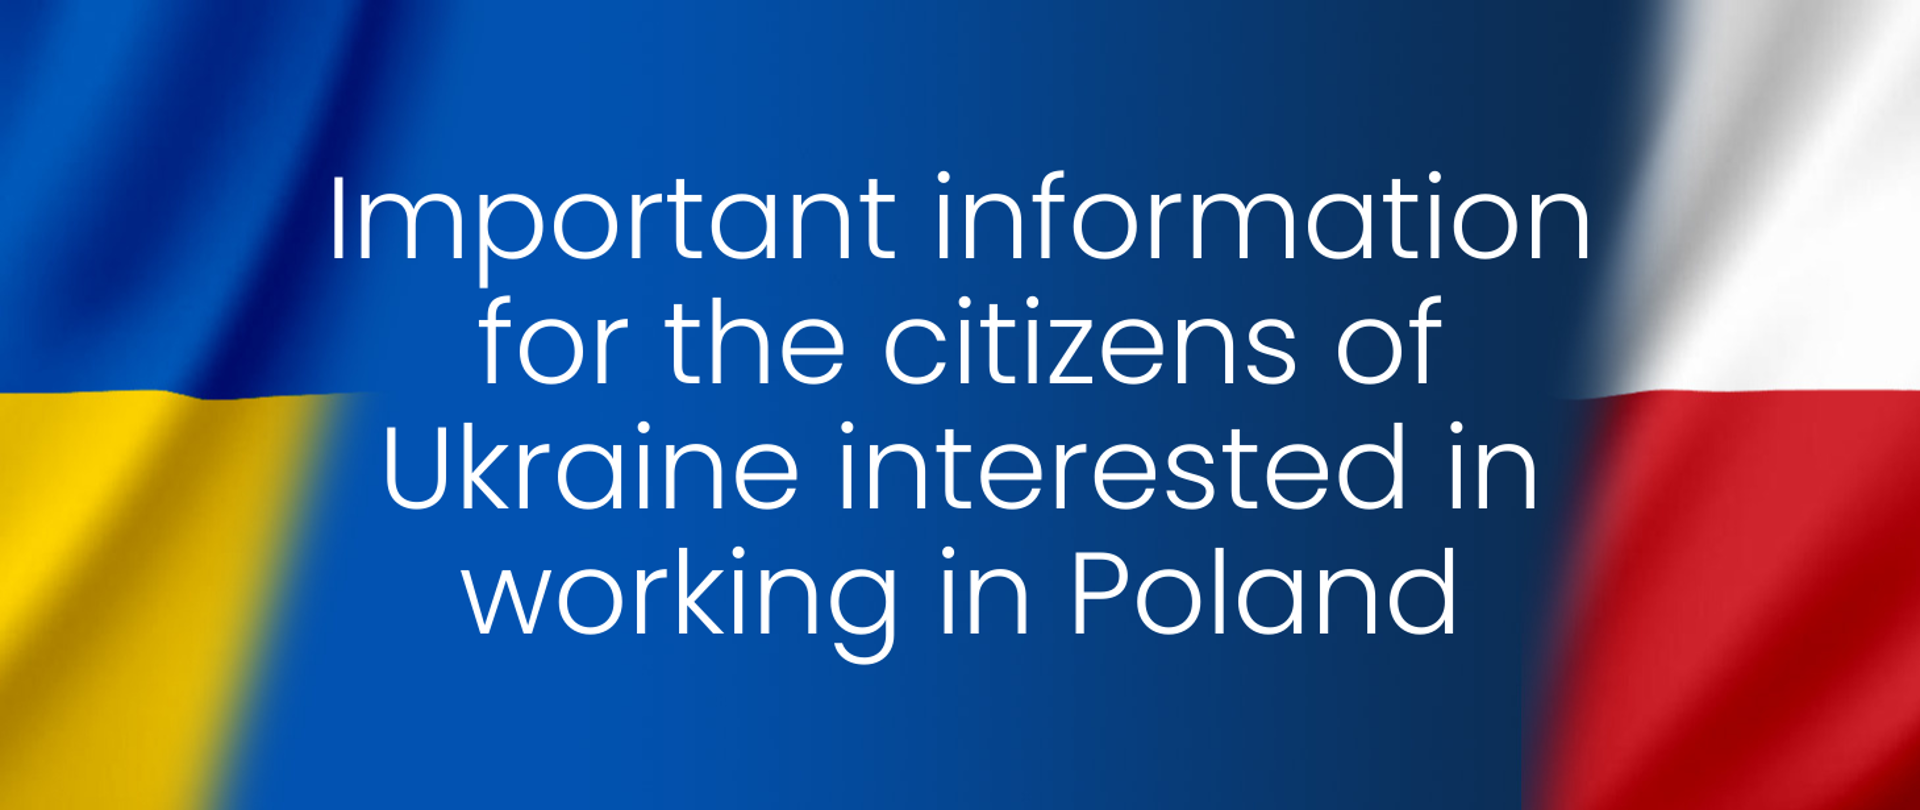 Important information for the citizens of Ukraine interested in working in Poland